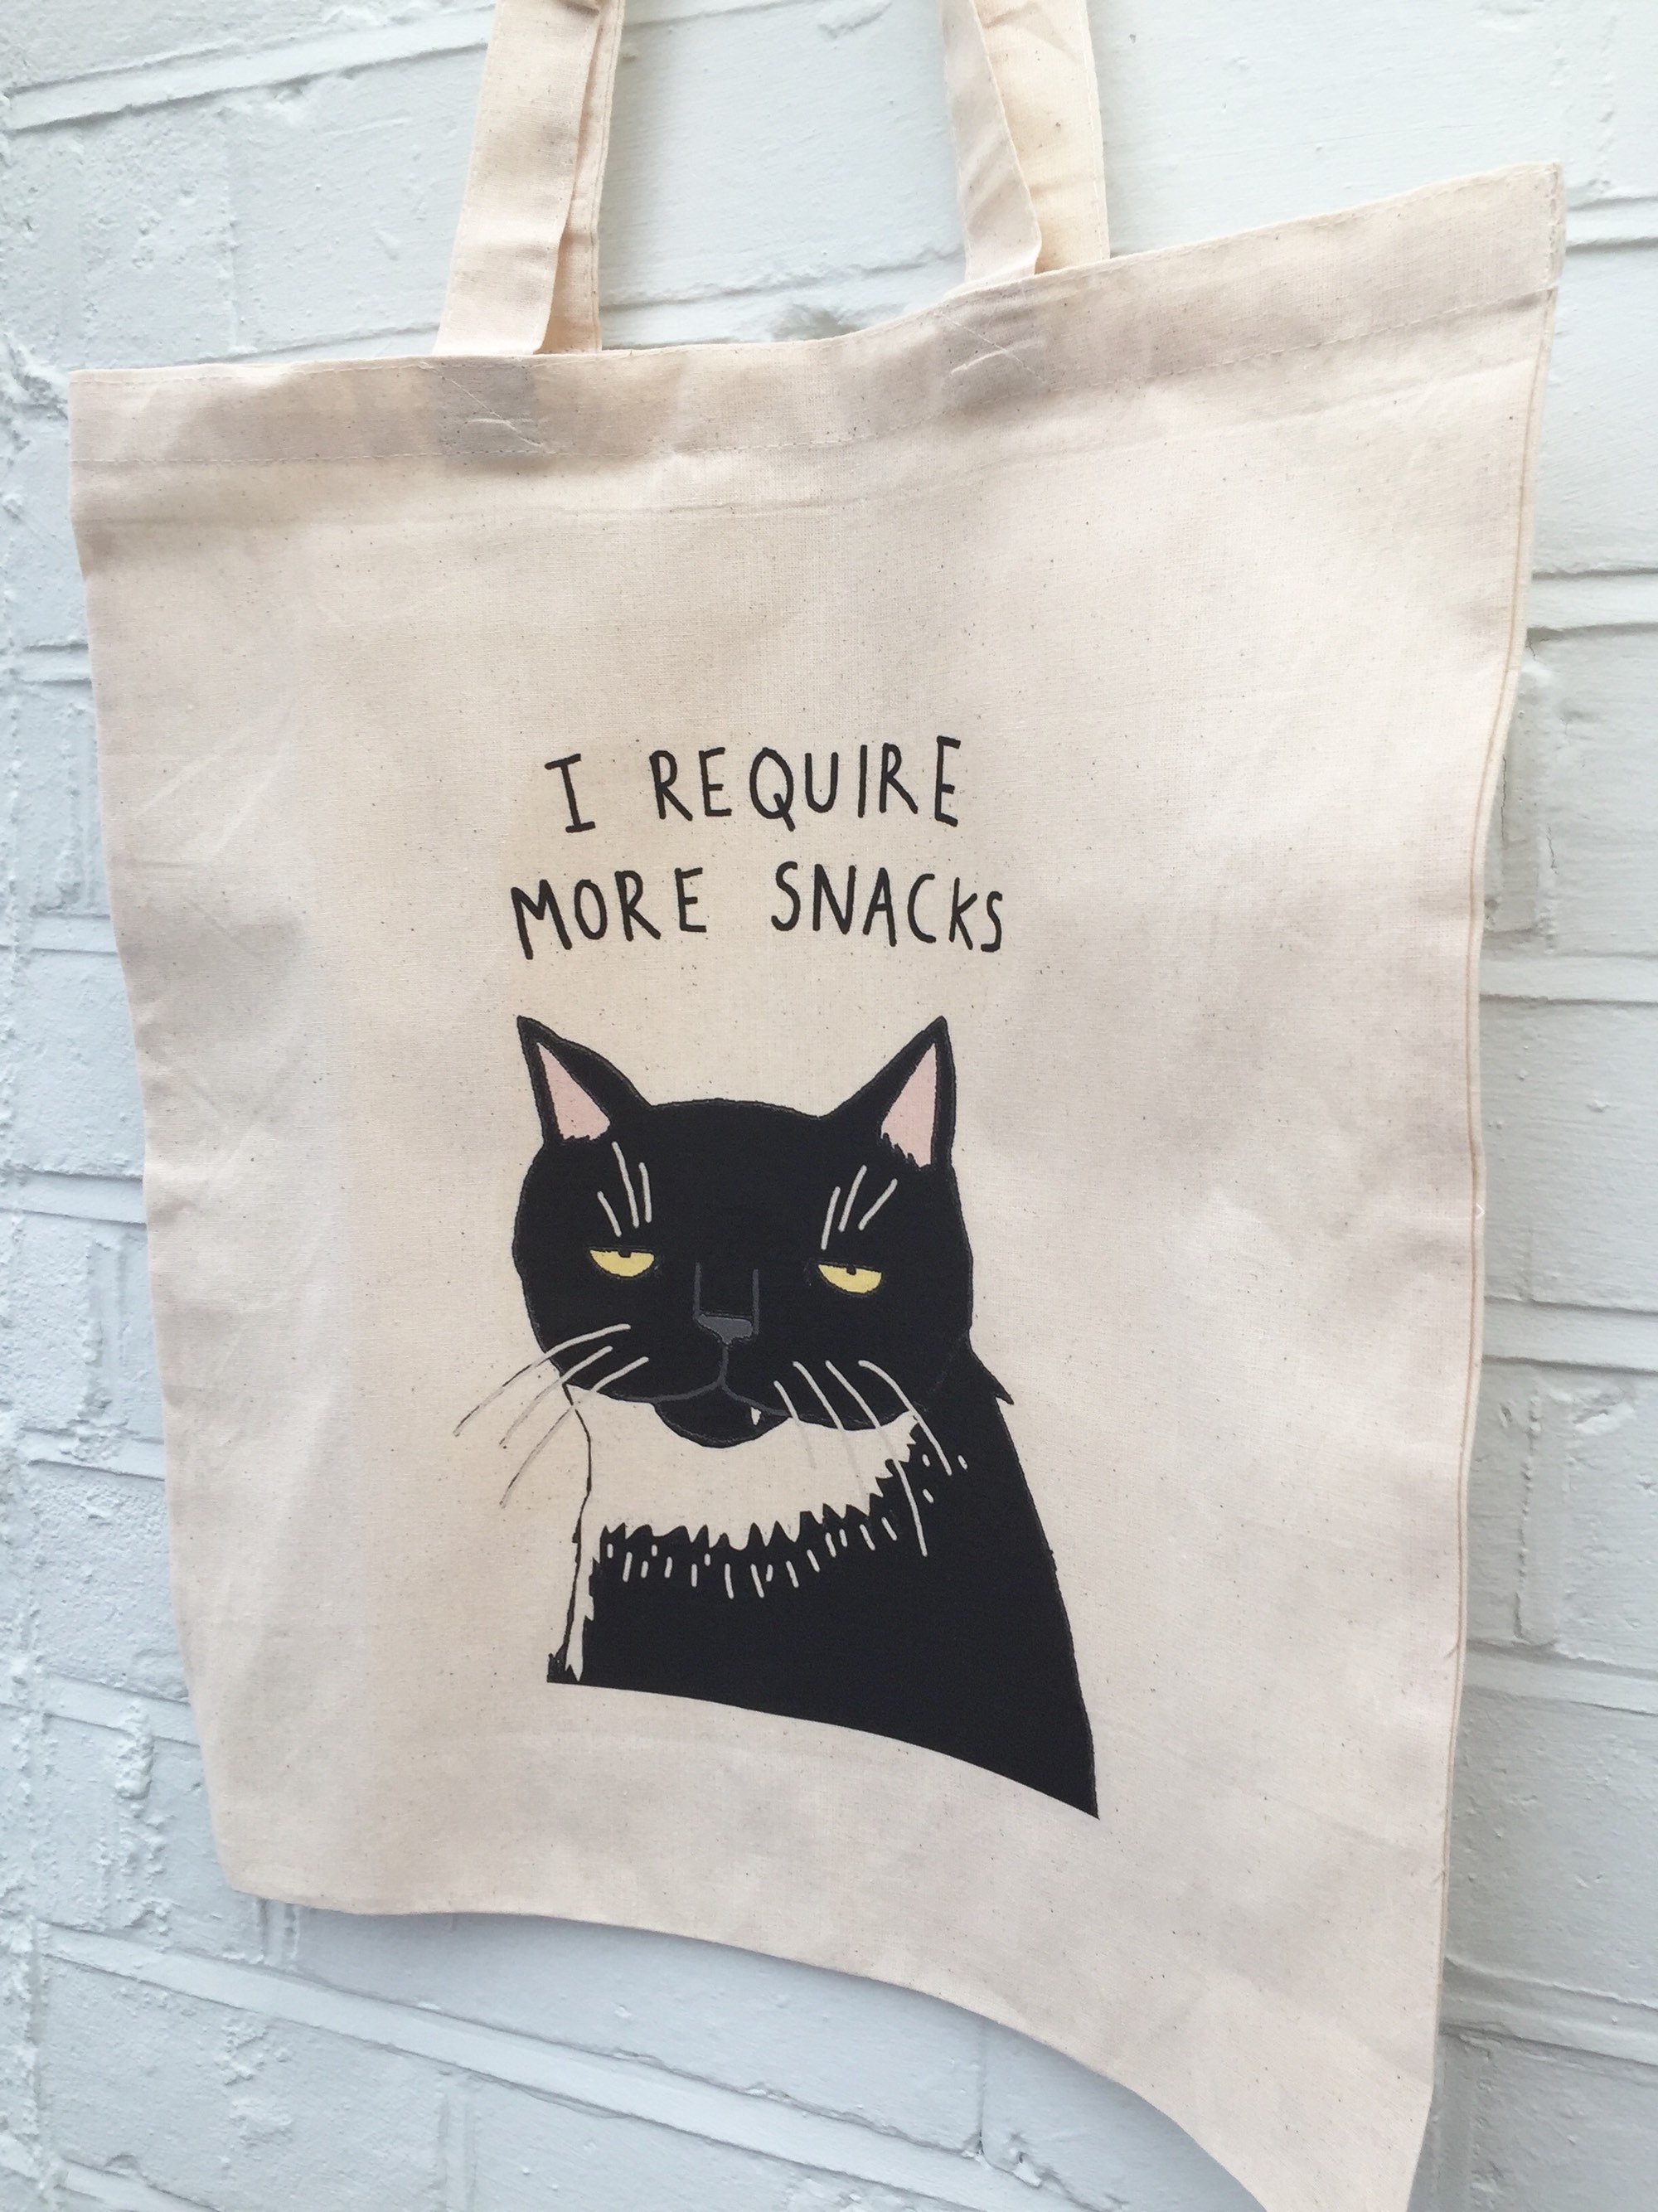 Funny Hungry Cat Tote Bag | Etsy